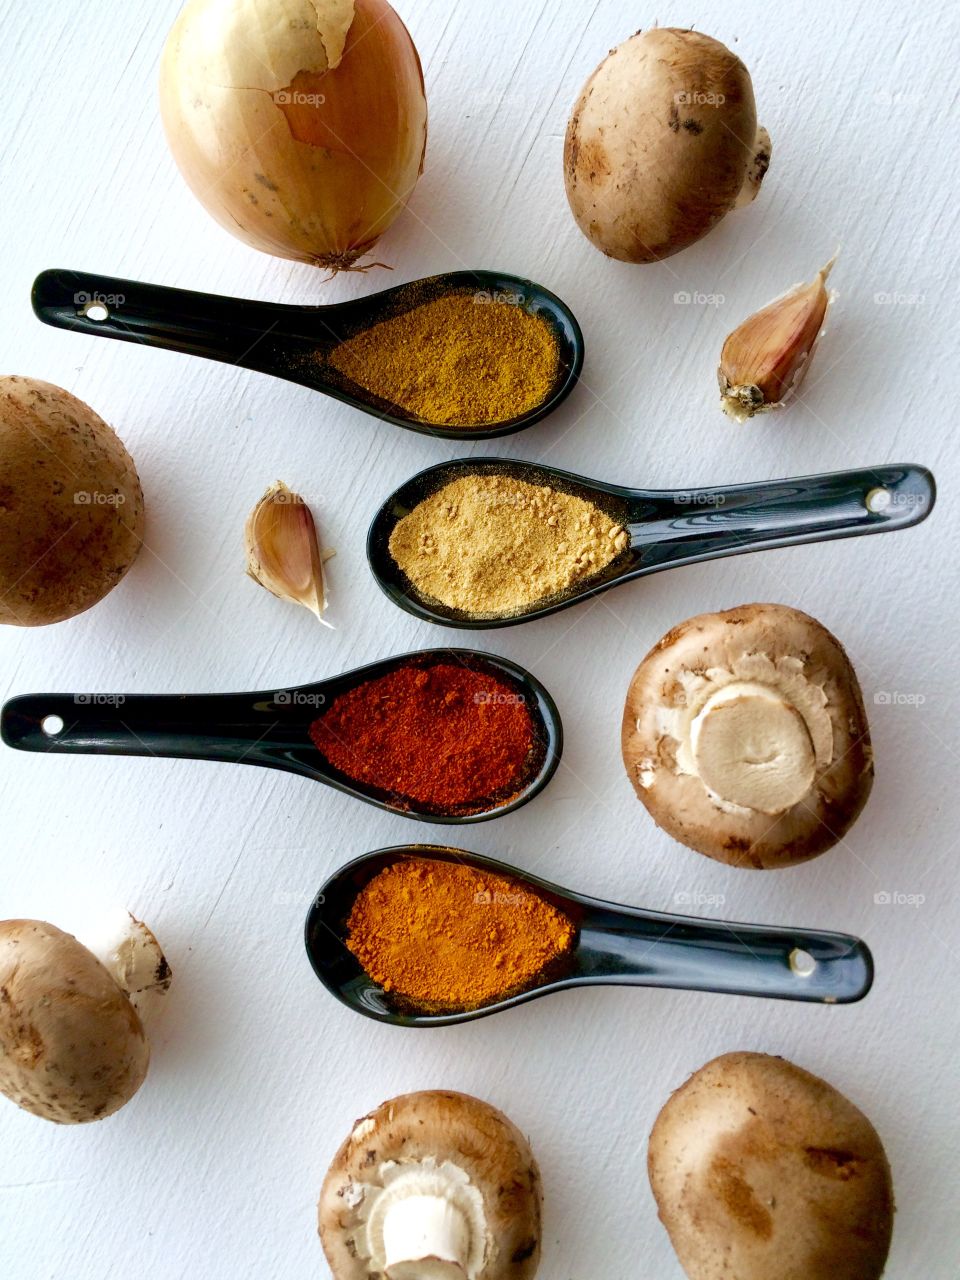 Spices and ingredients